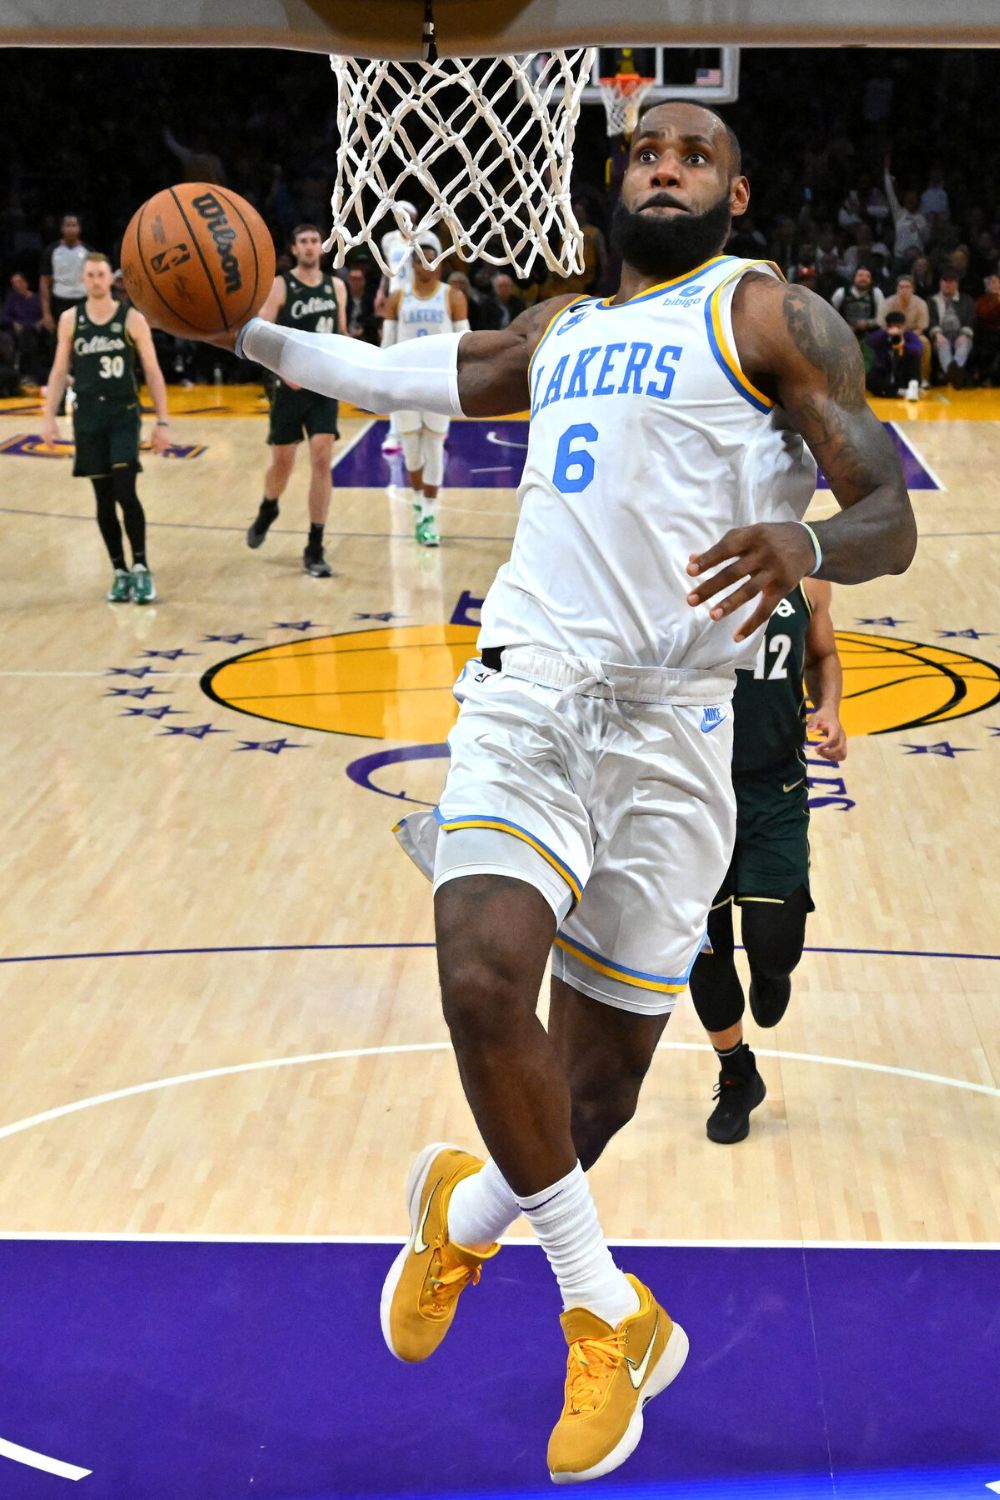 Lakers Player Scoring A Dunk Point